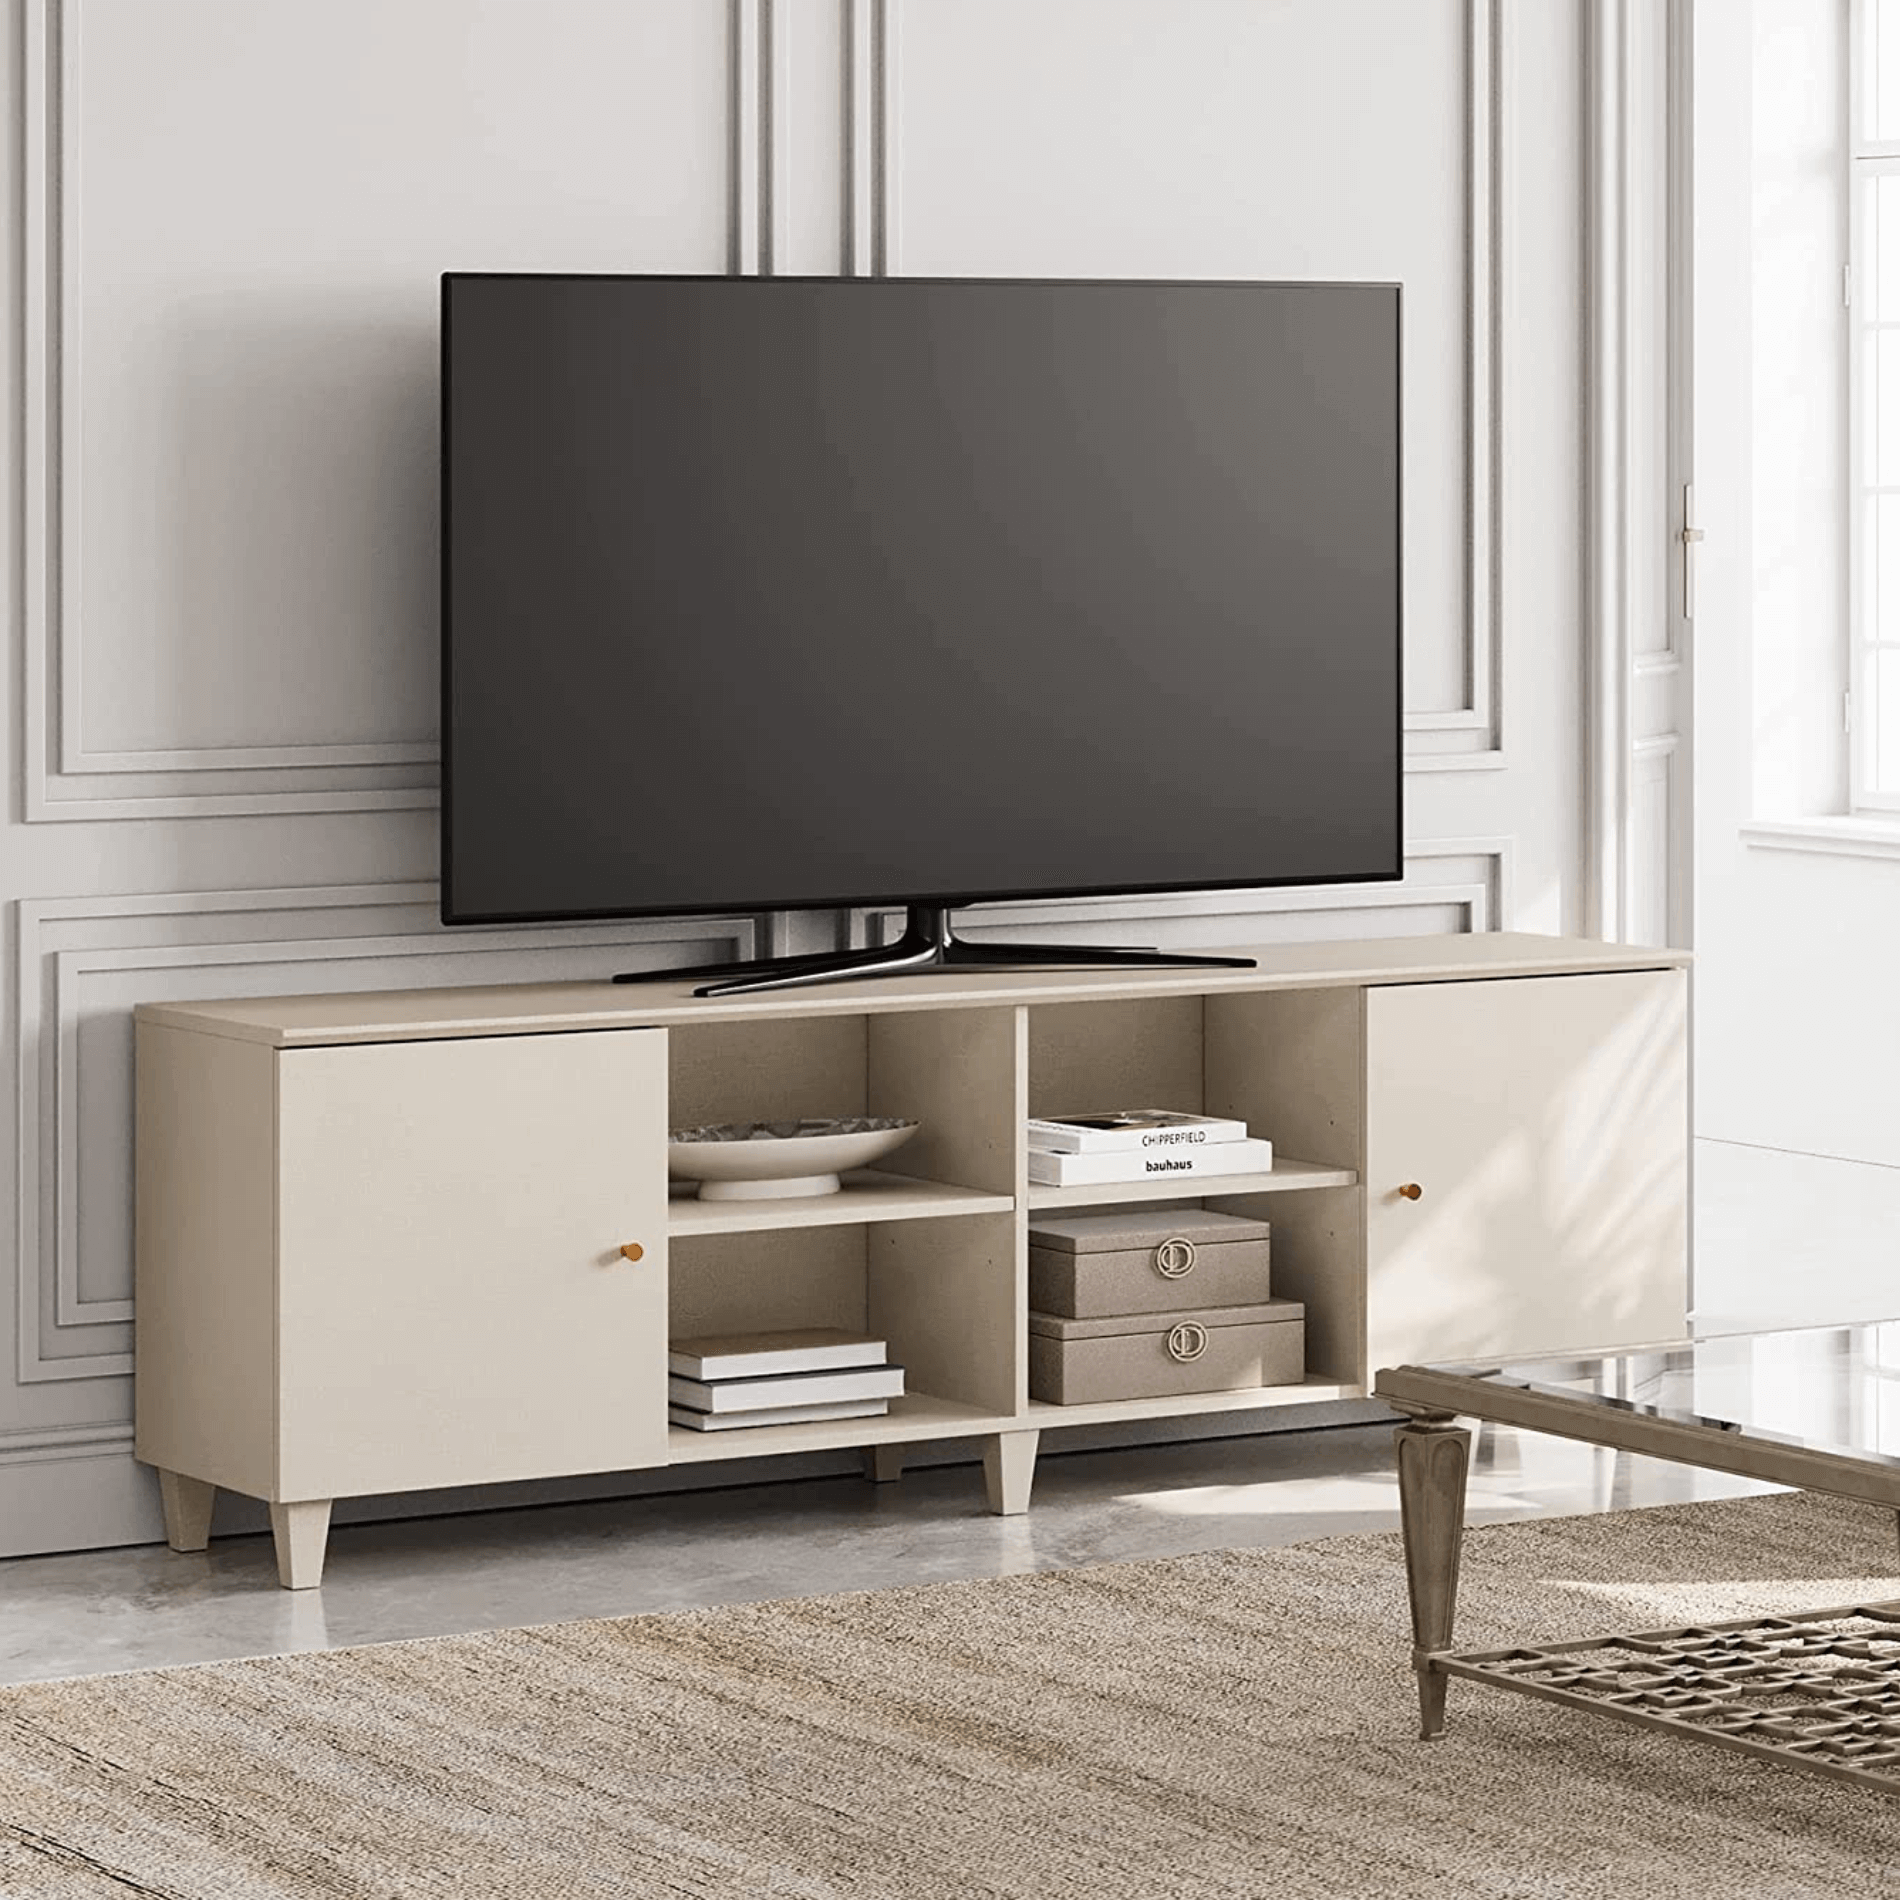 WAMPAT TV Stand Unit Cabinet for 55 inch tv,White TV table up to